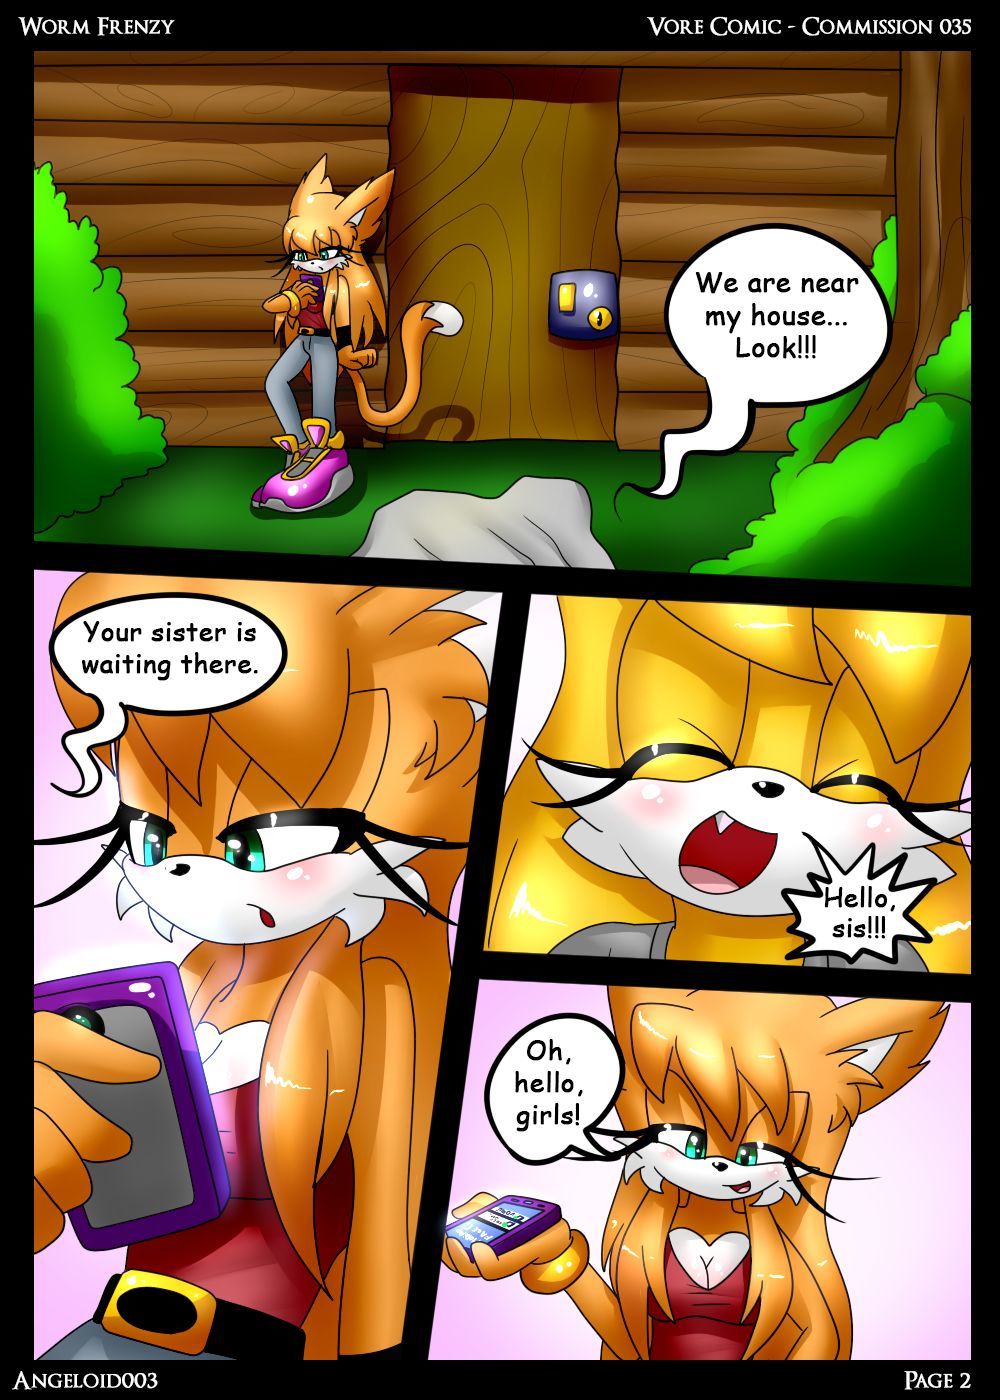 Worm Frenzy - Angeloid003 page 2